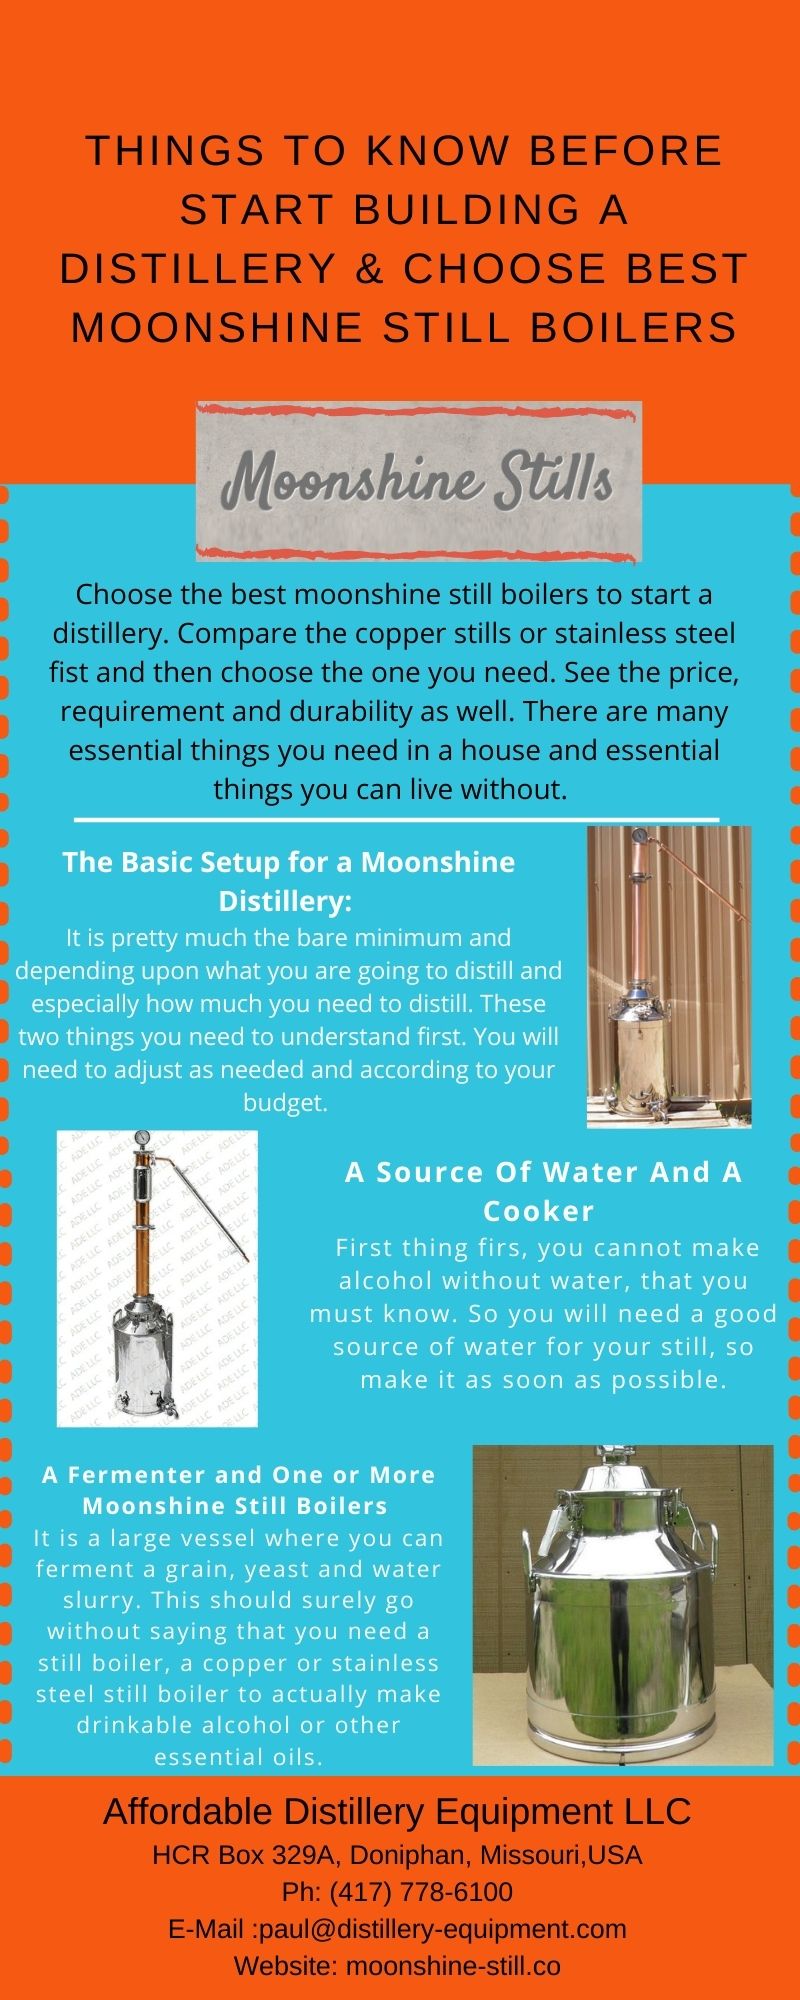 Things to Know Before Start Building a Distillery & Choose Best Moonshine Still Boilers.jpg  by moonshinestill